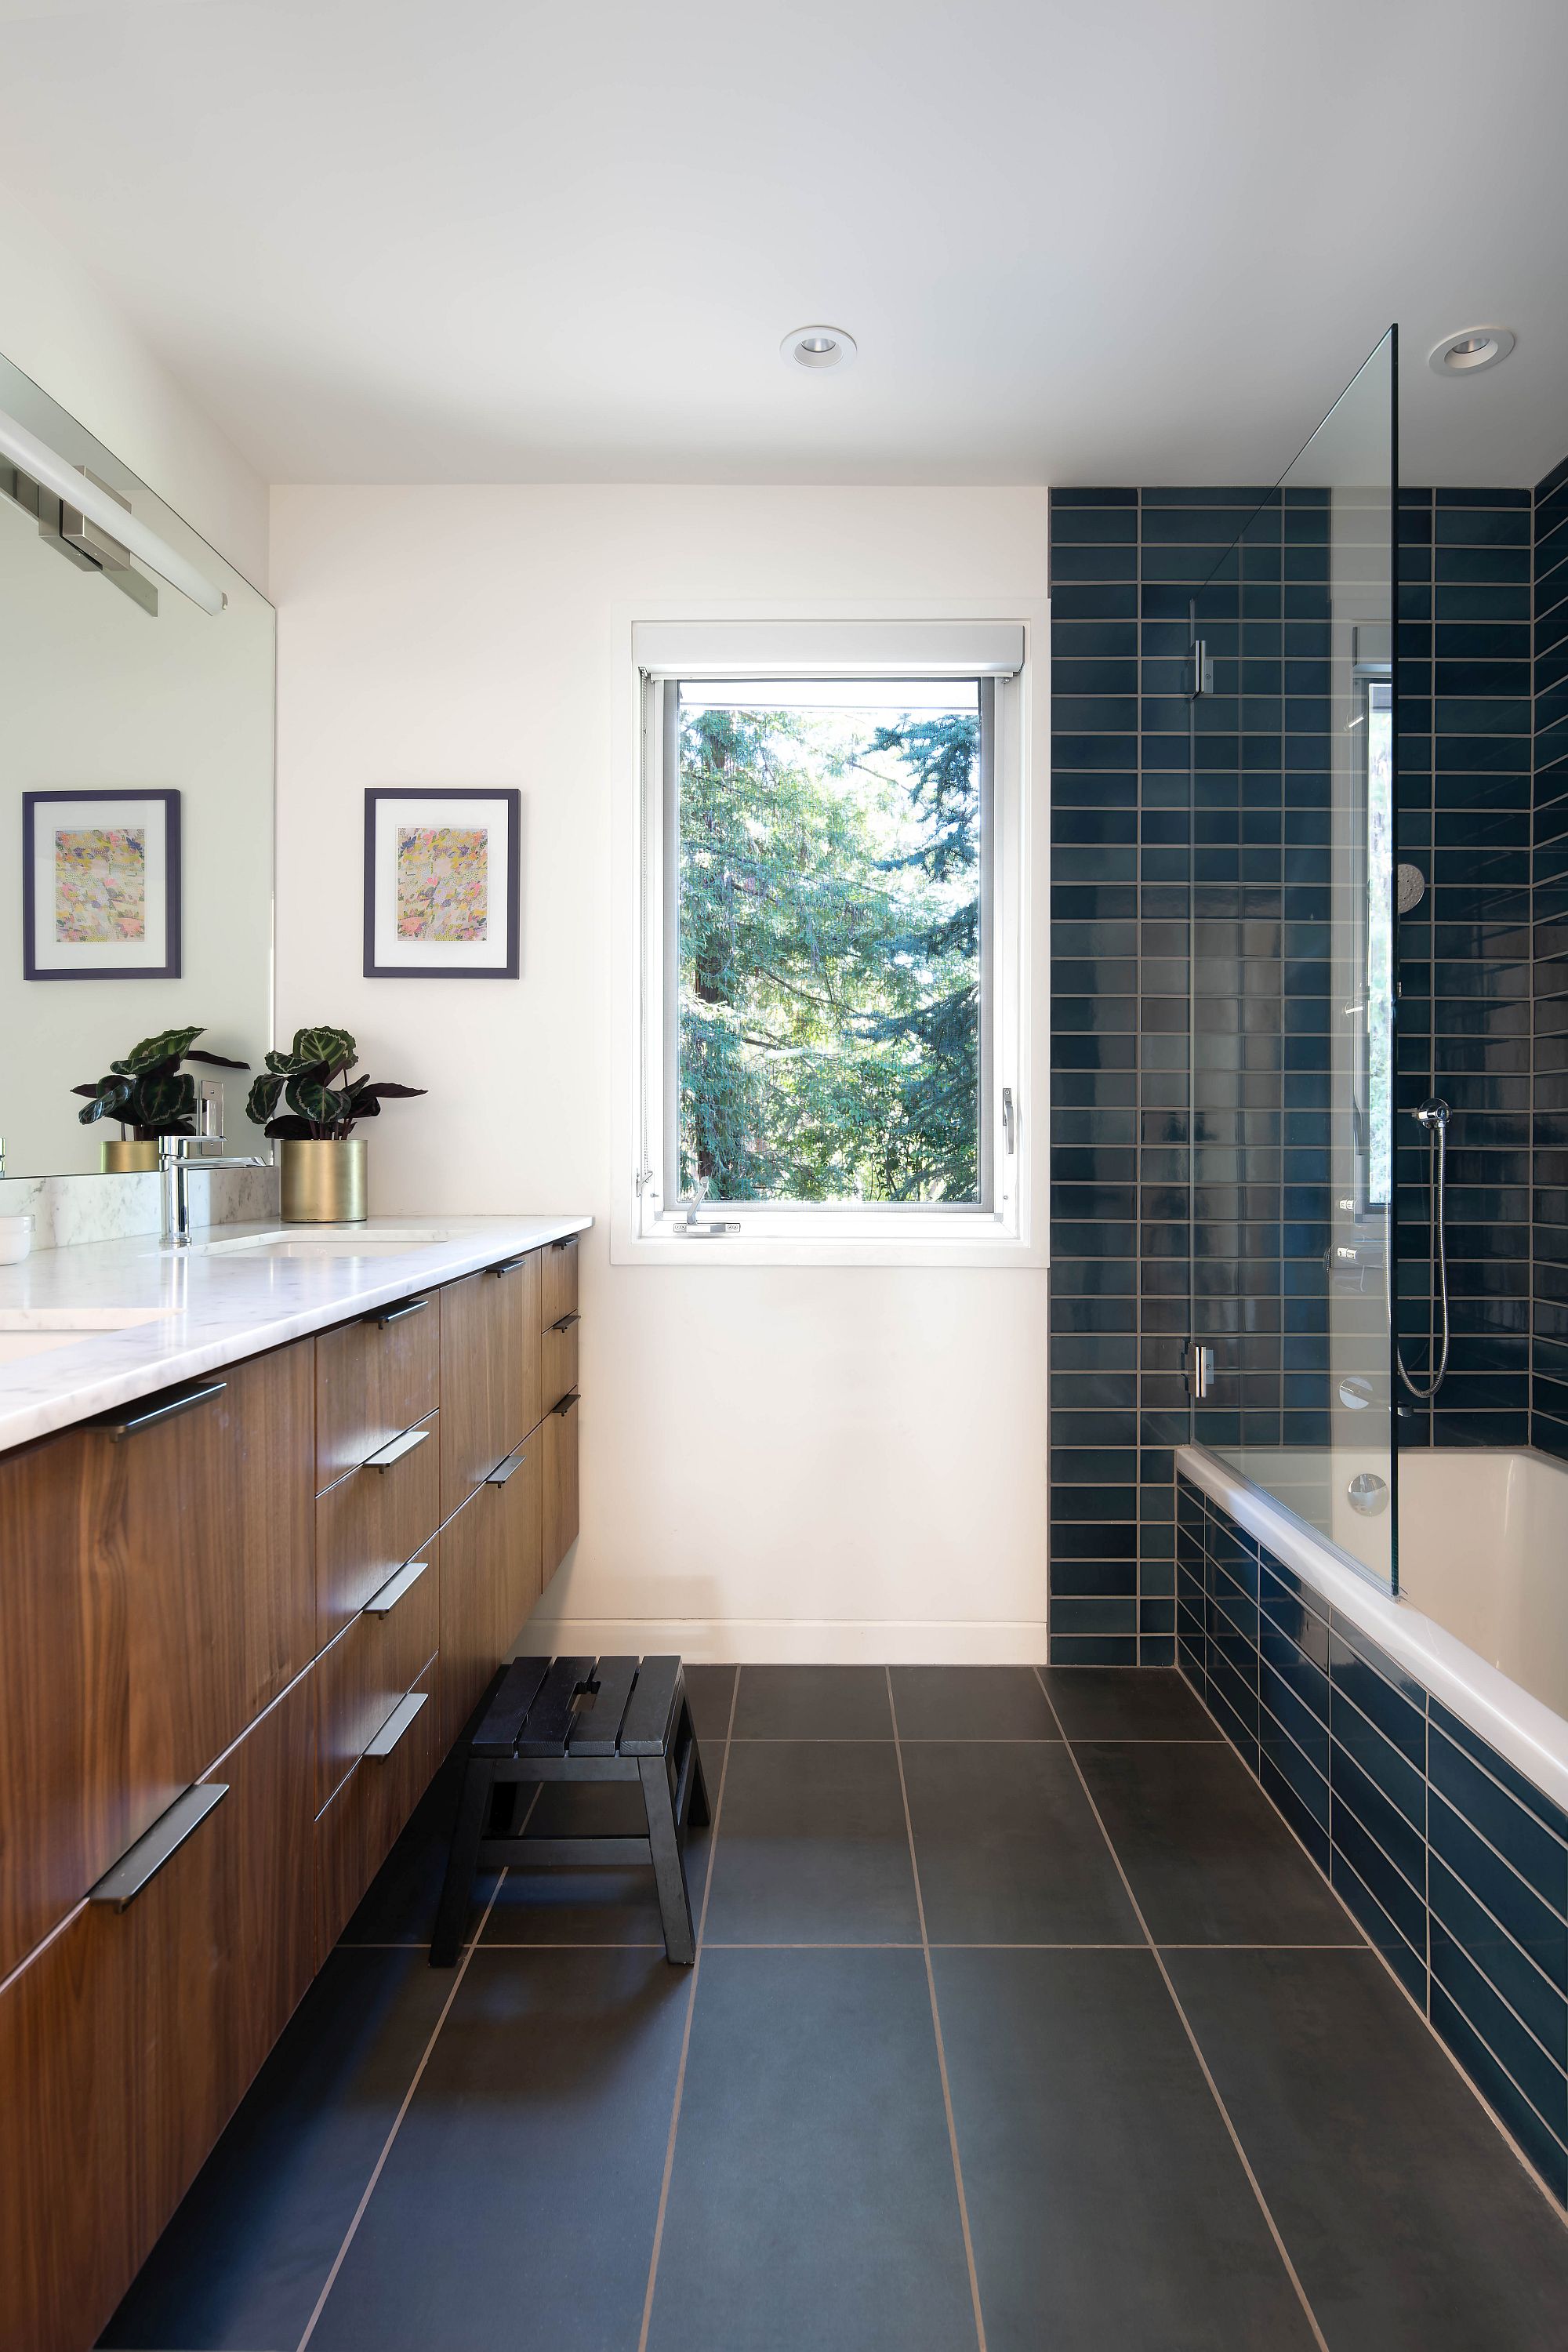 Custom-vanities-also-from-Henrybuilt-along-with-a-new-design-gives-it-a-modern-vibe